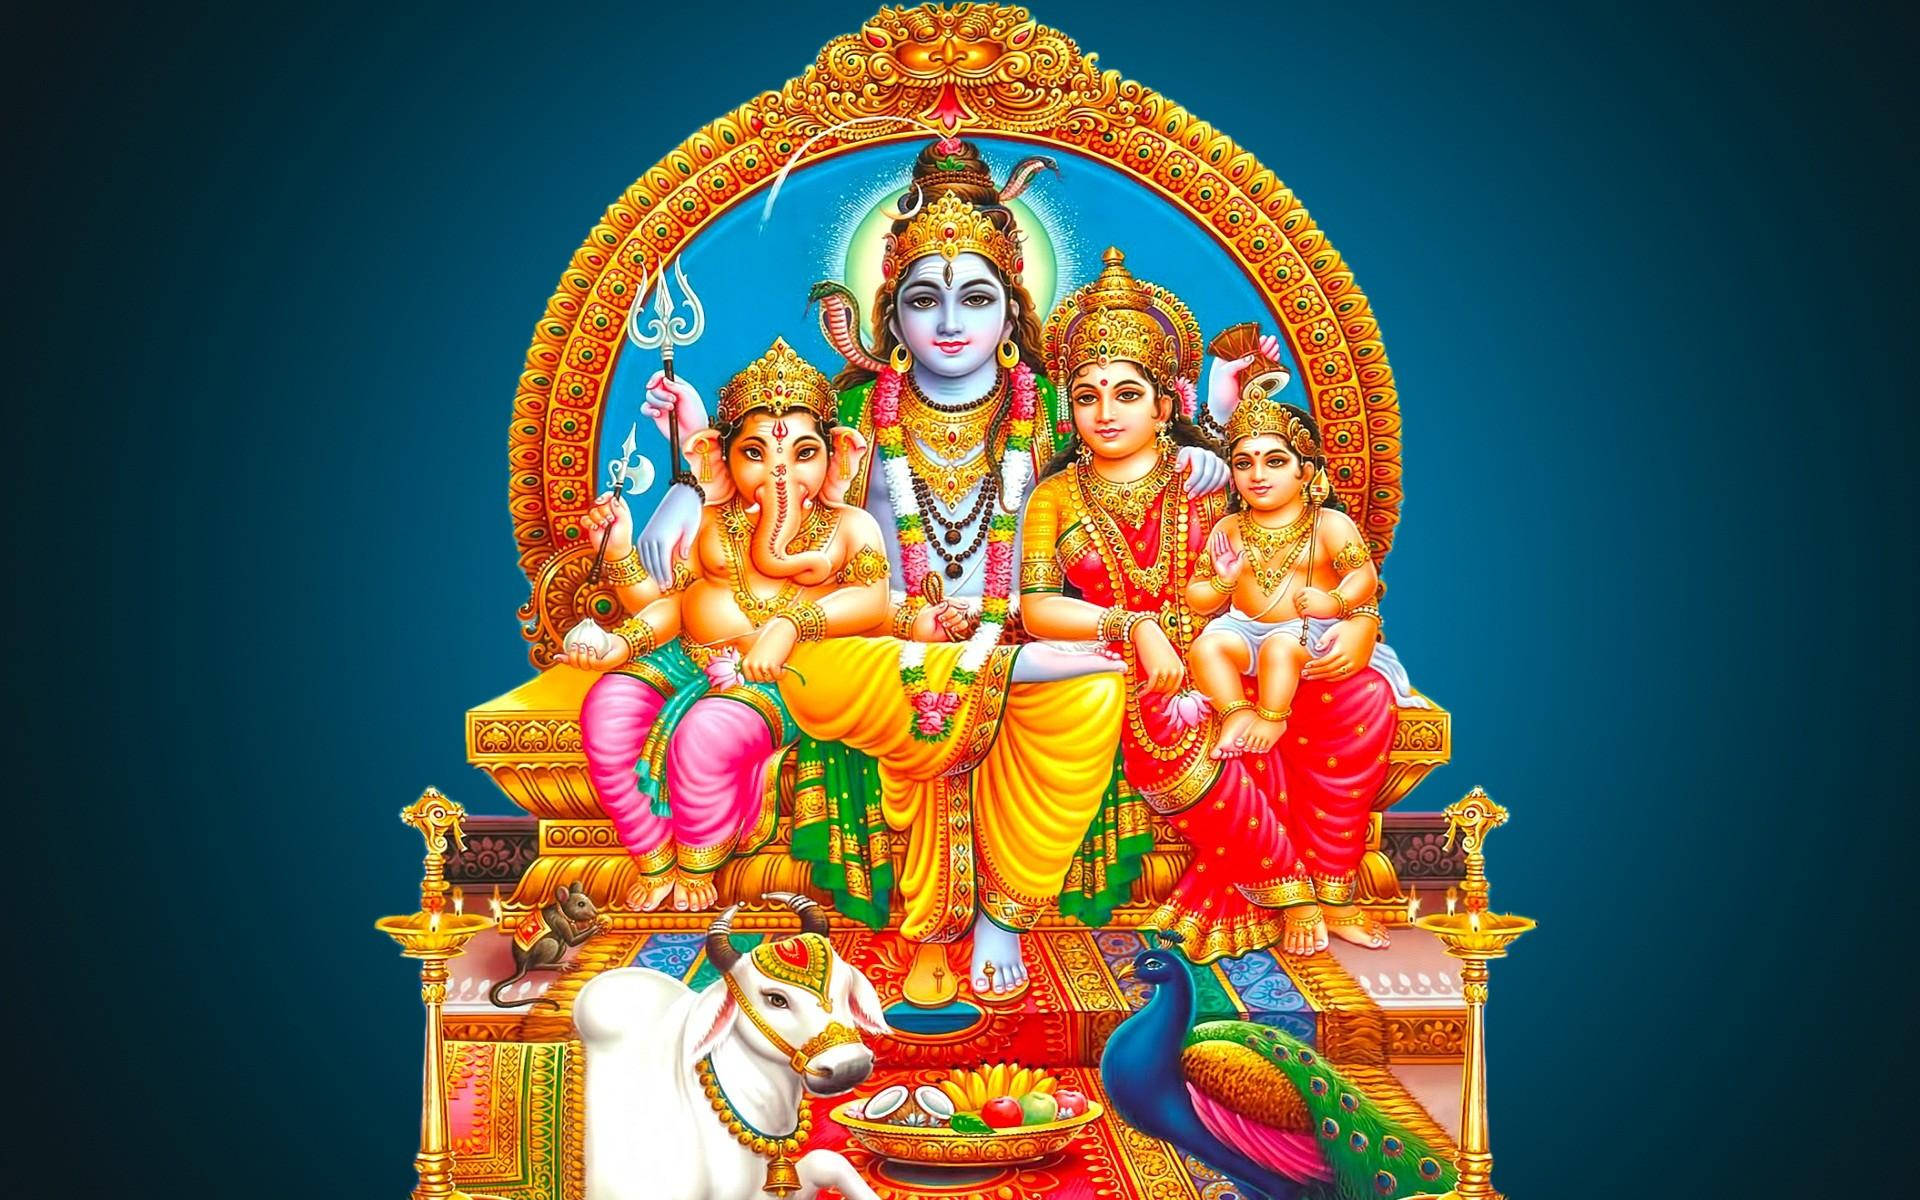 Lord Shiva Family On Gold Throne Wallpaper